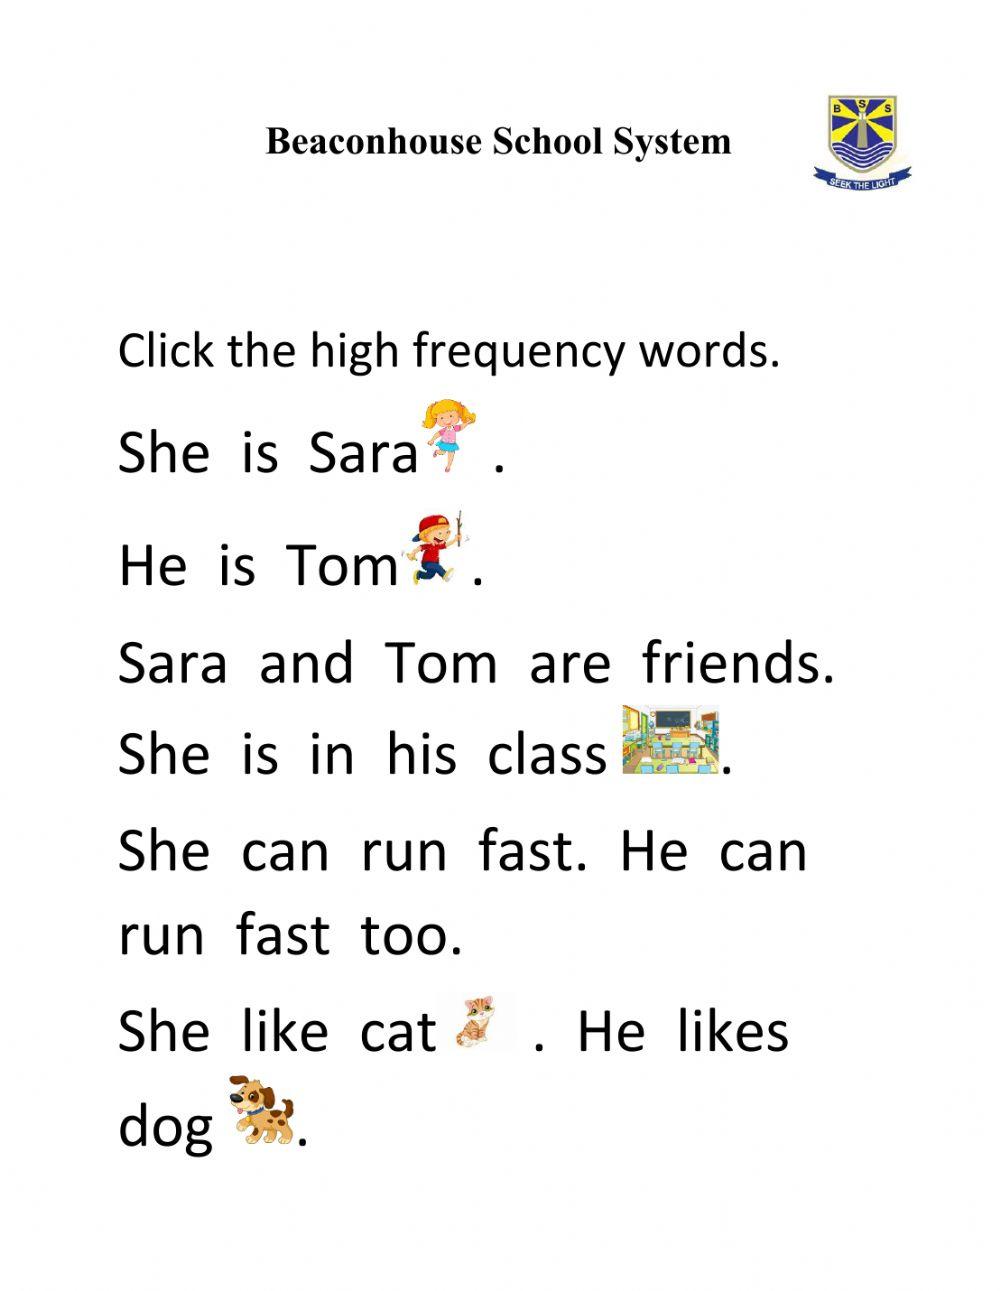 High frequency words